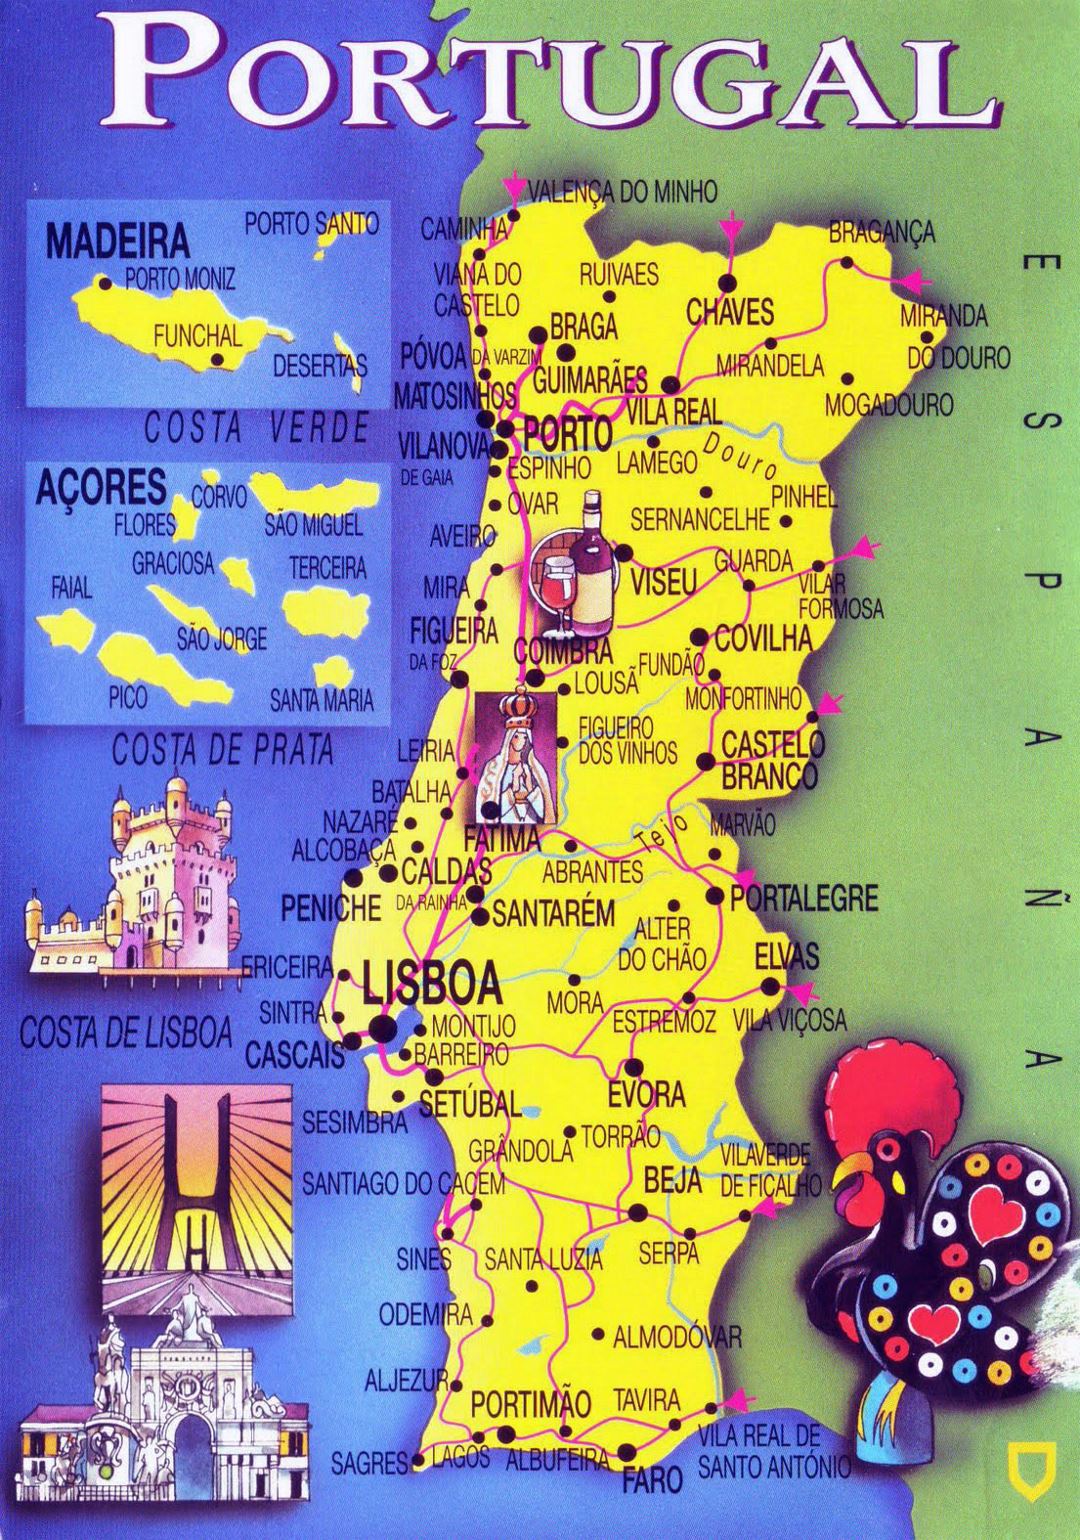 Large tourist map of Portugal